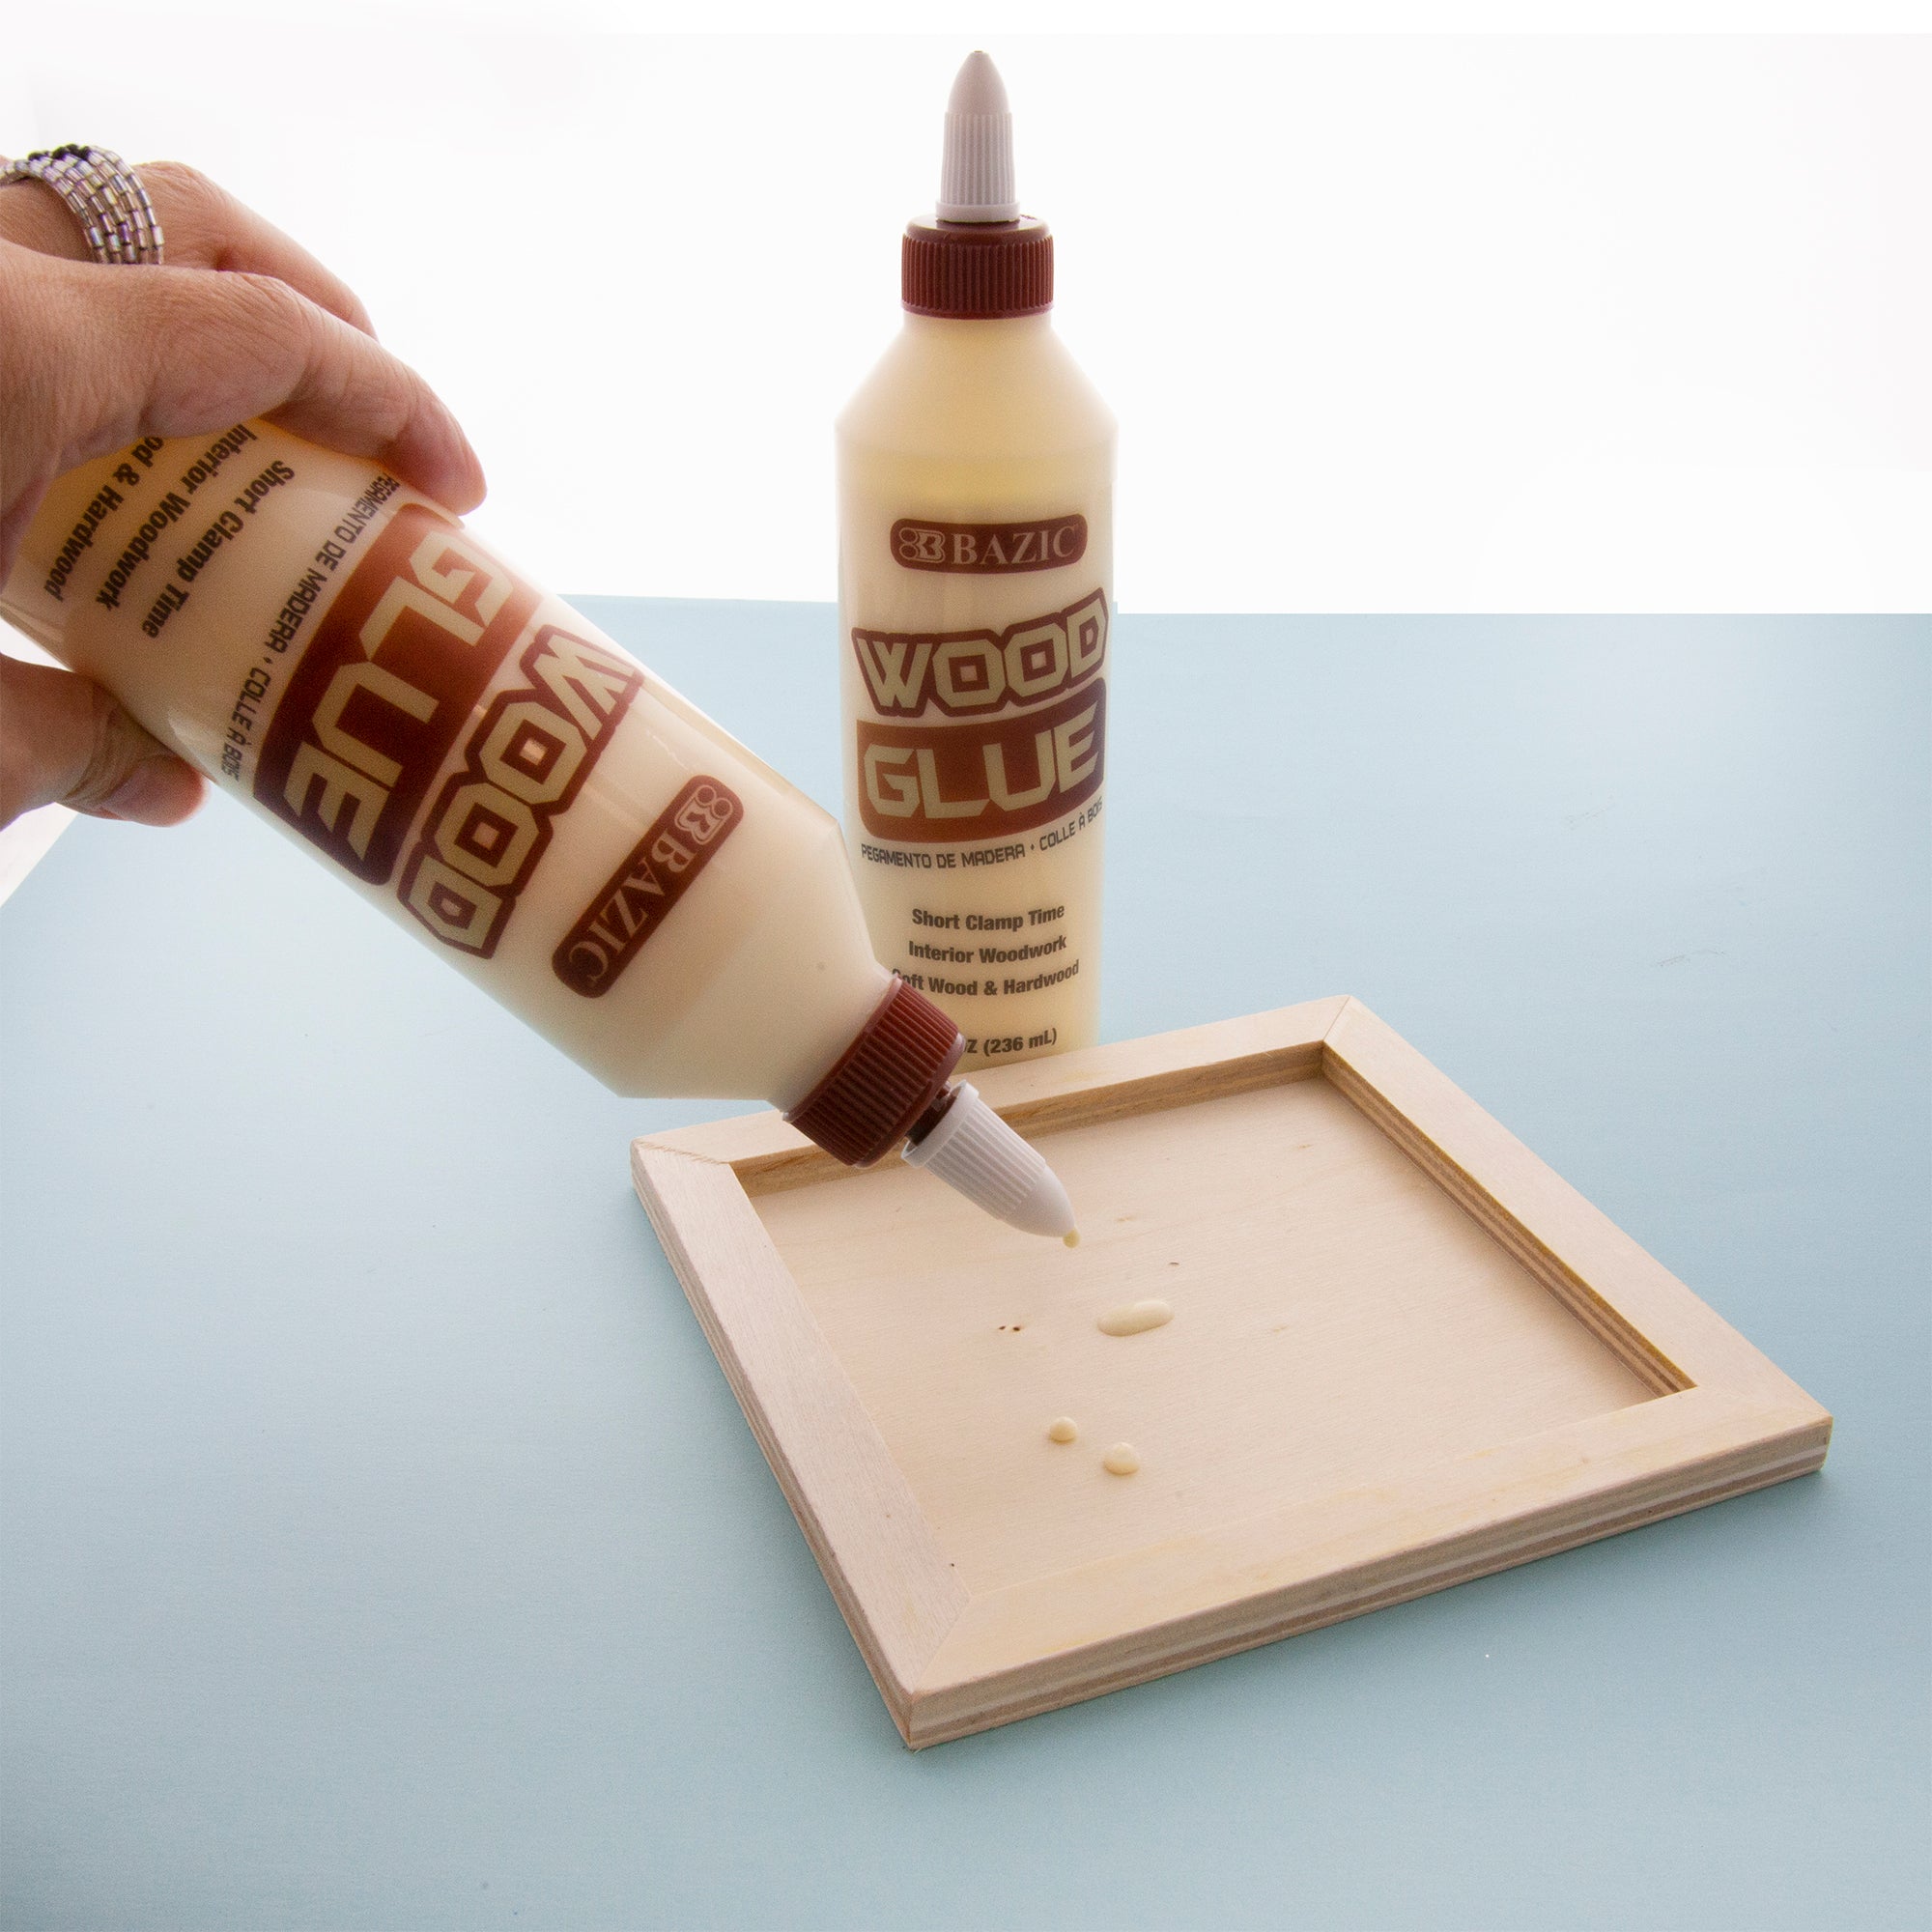 6 Best Wood Glue Reviews: Extra Strong Glue for Woodworking & Hobbies